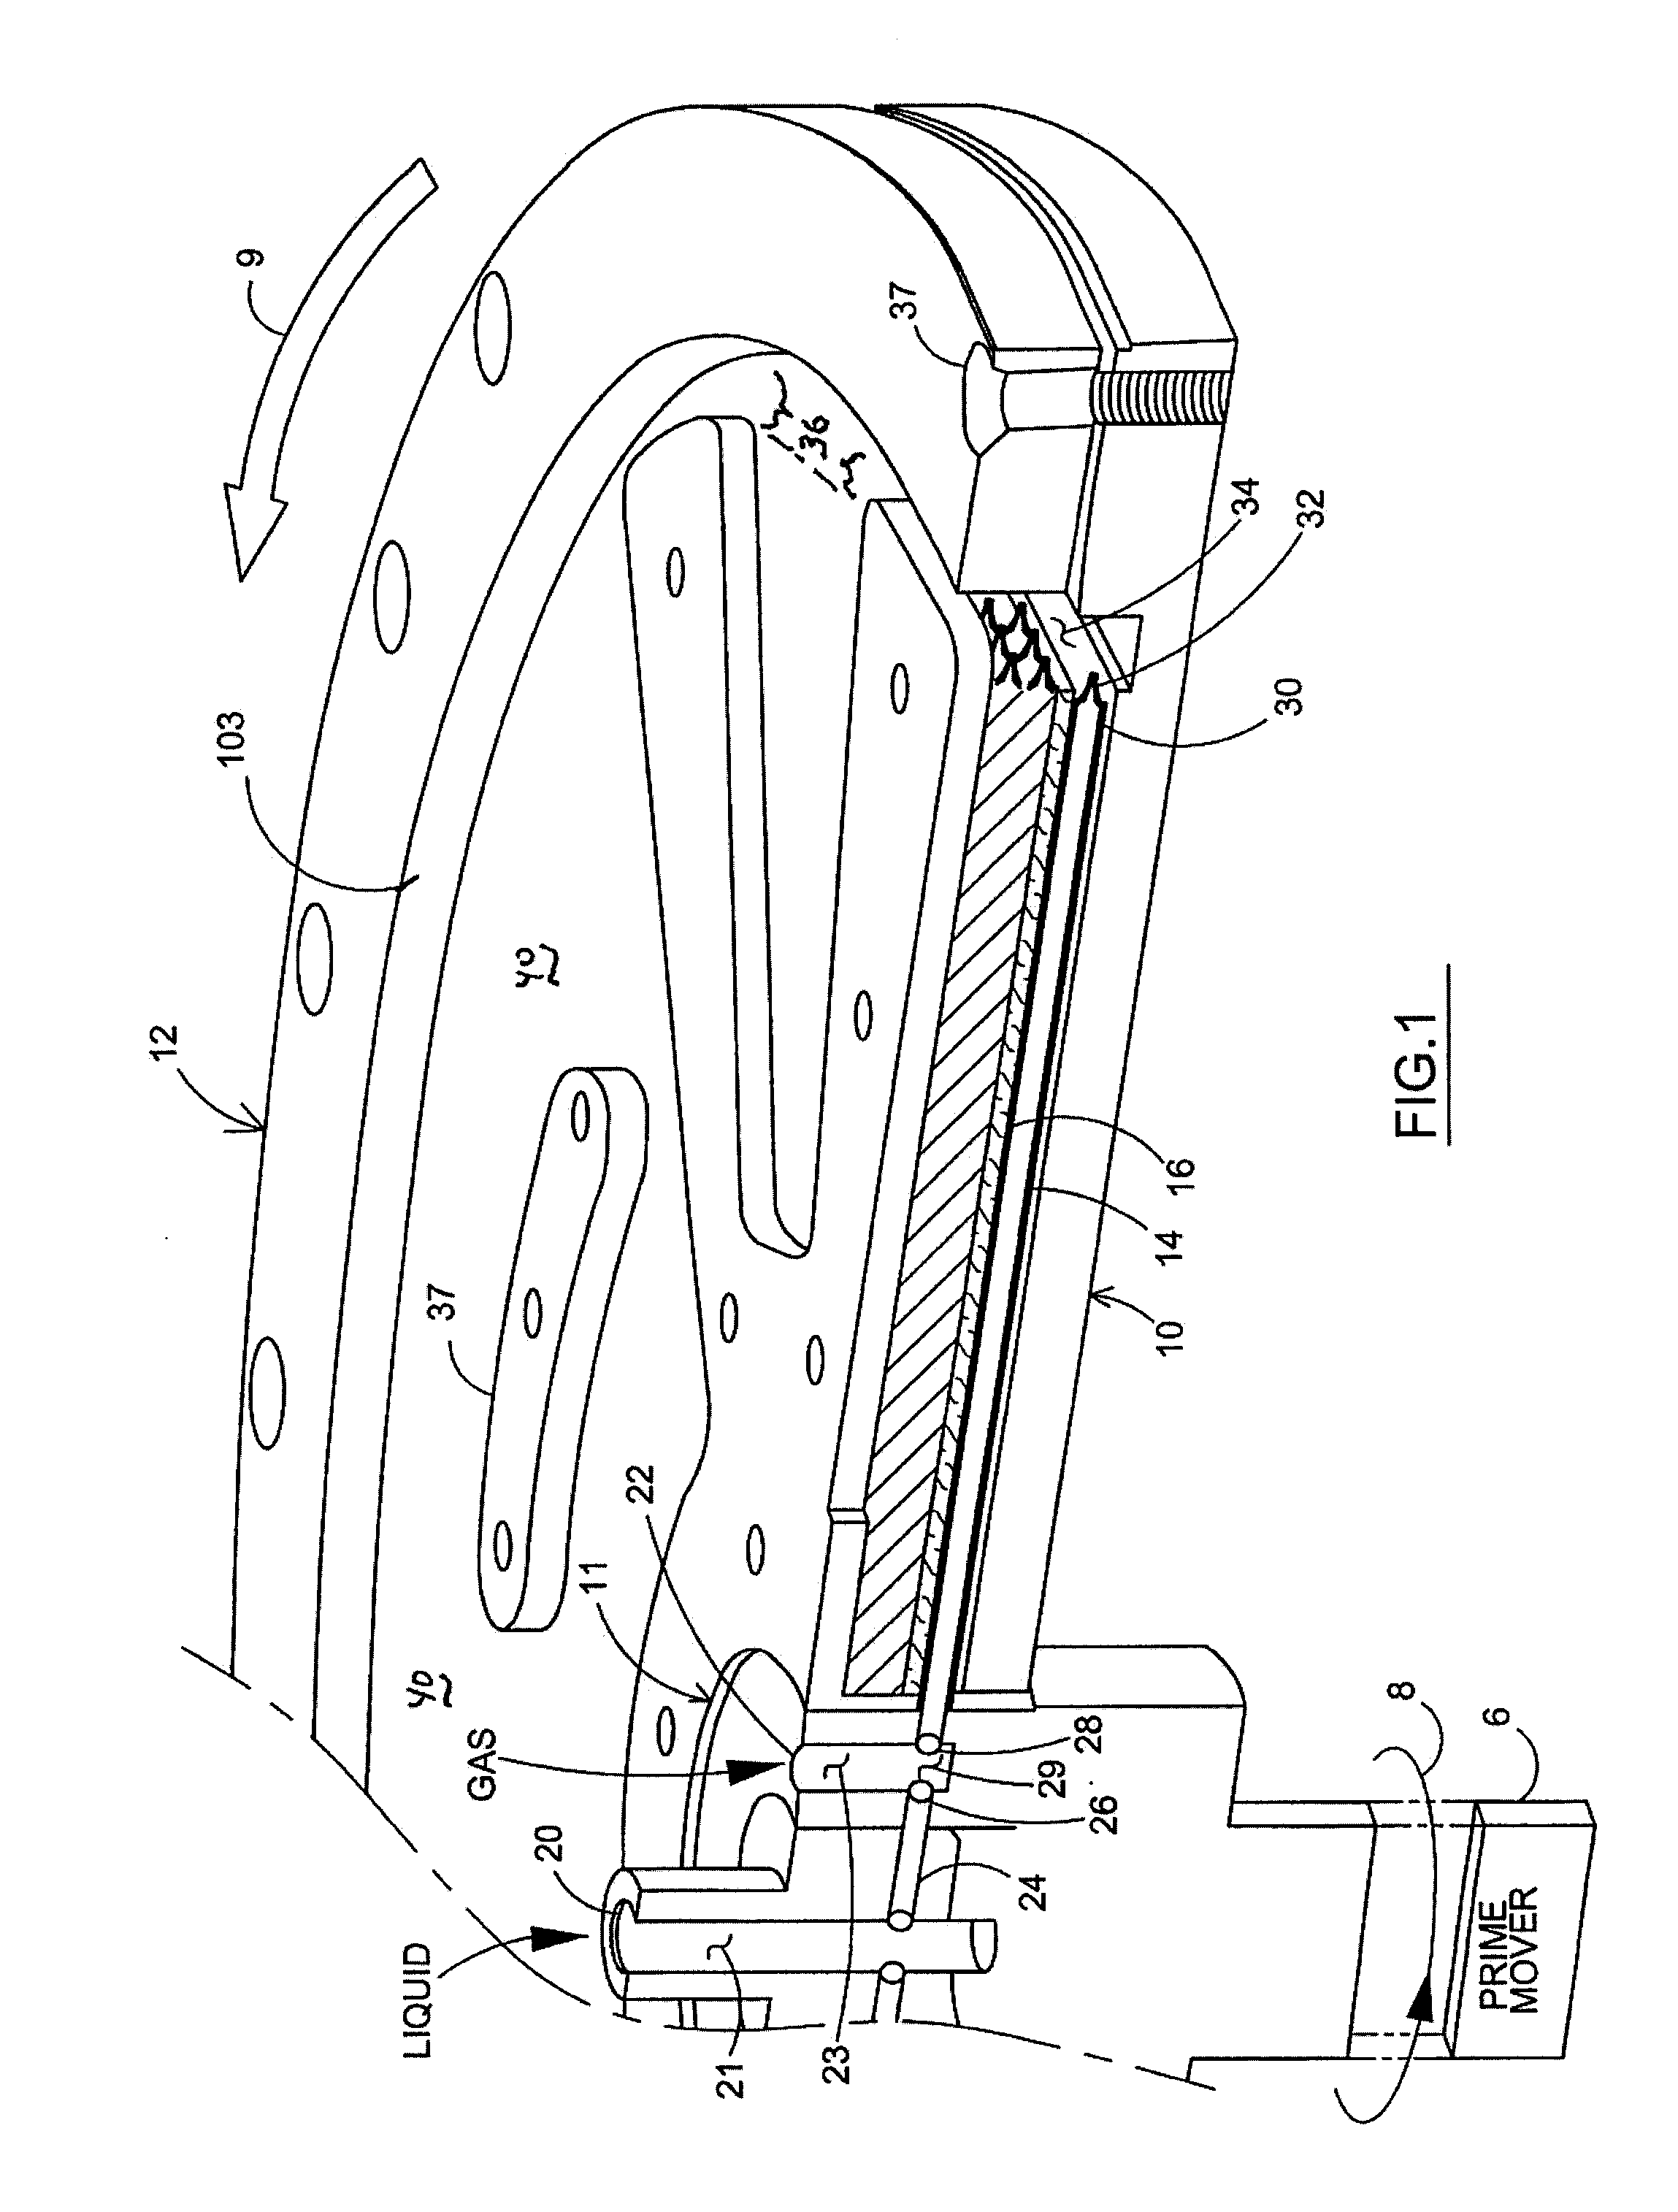 Method and System of Compressing Gas With Flow Restrictions